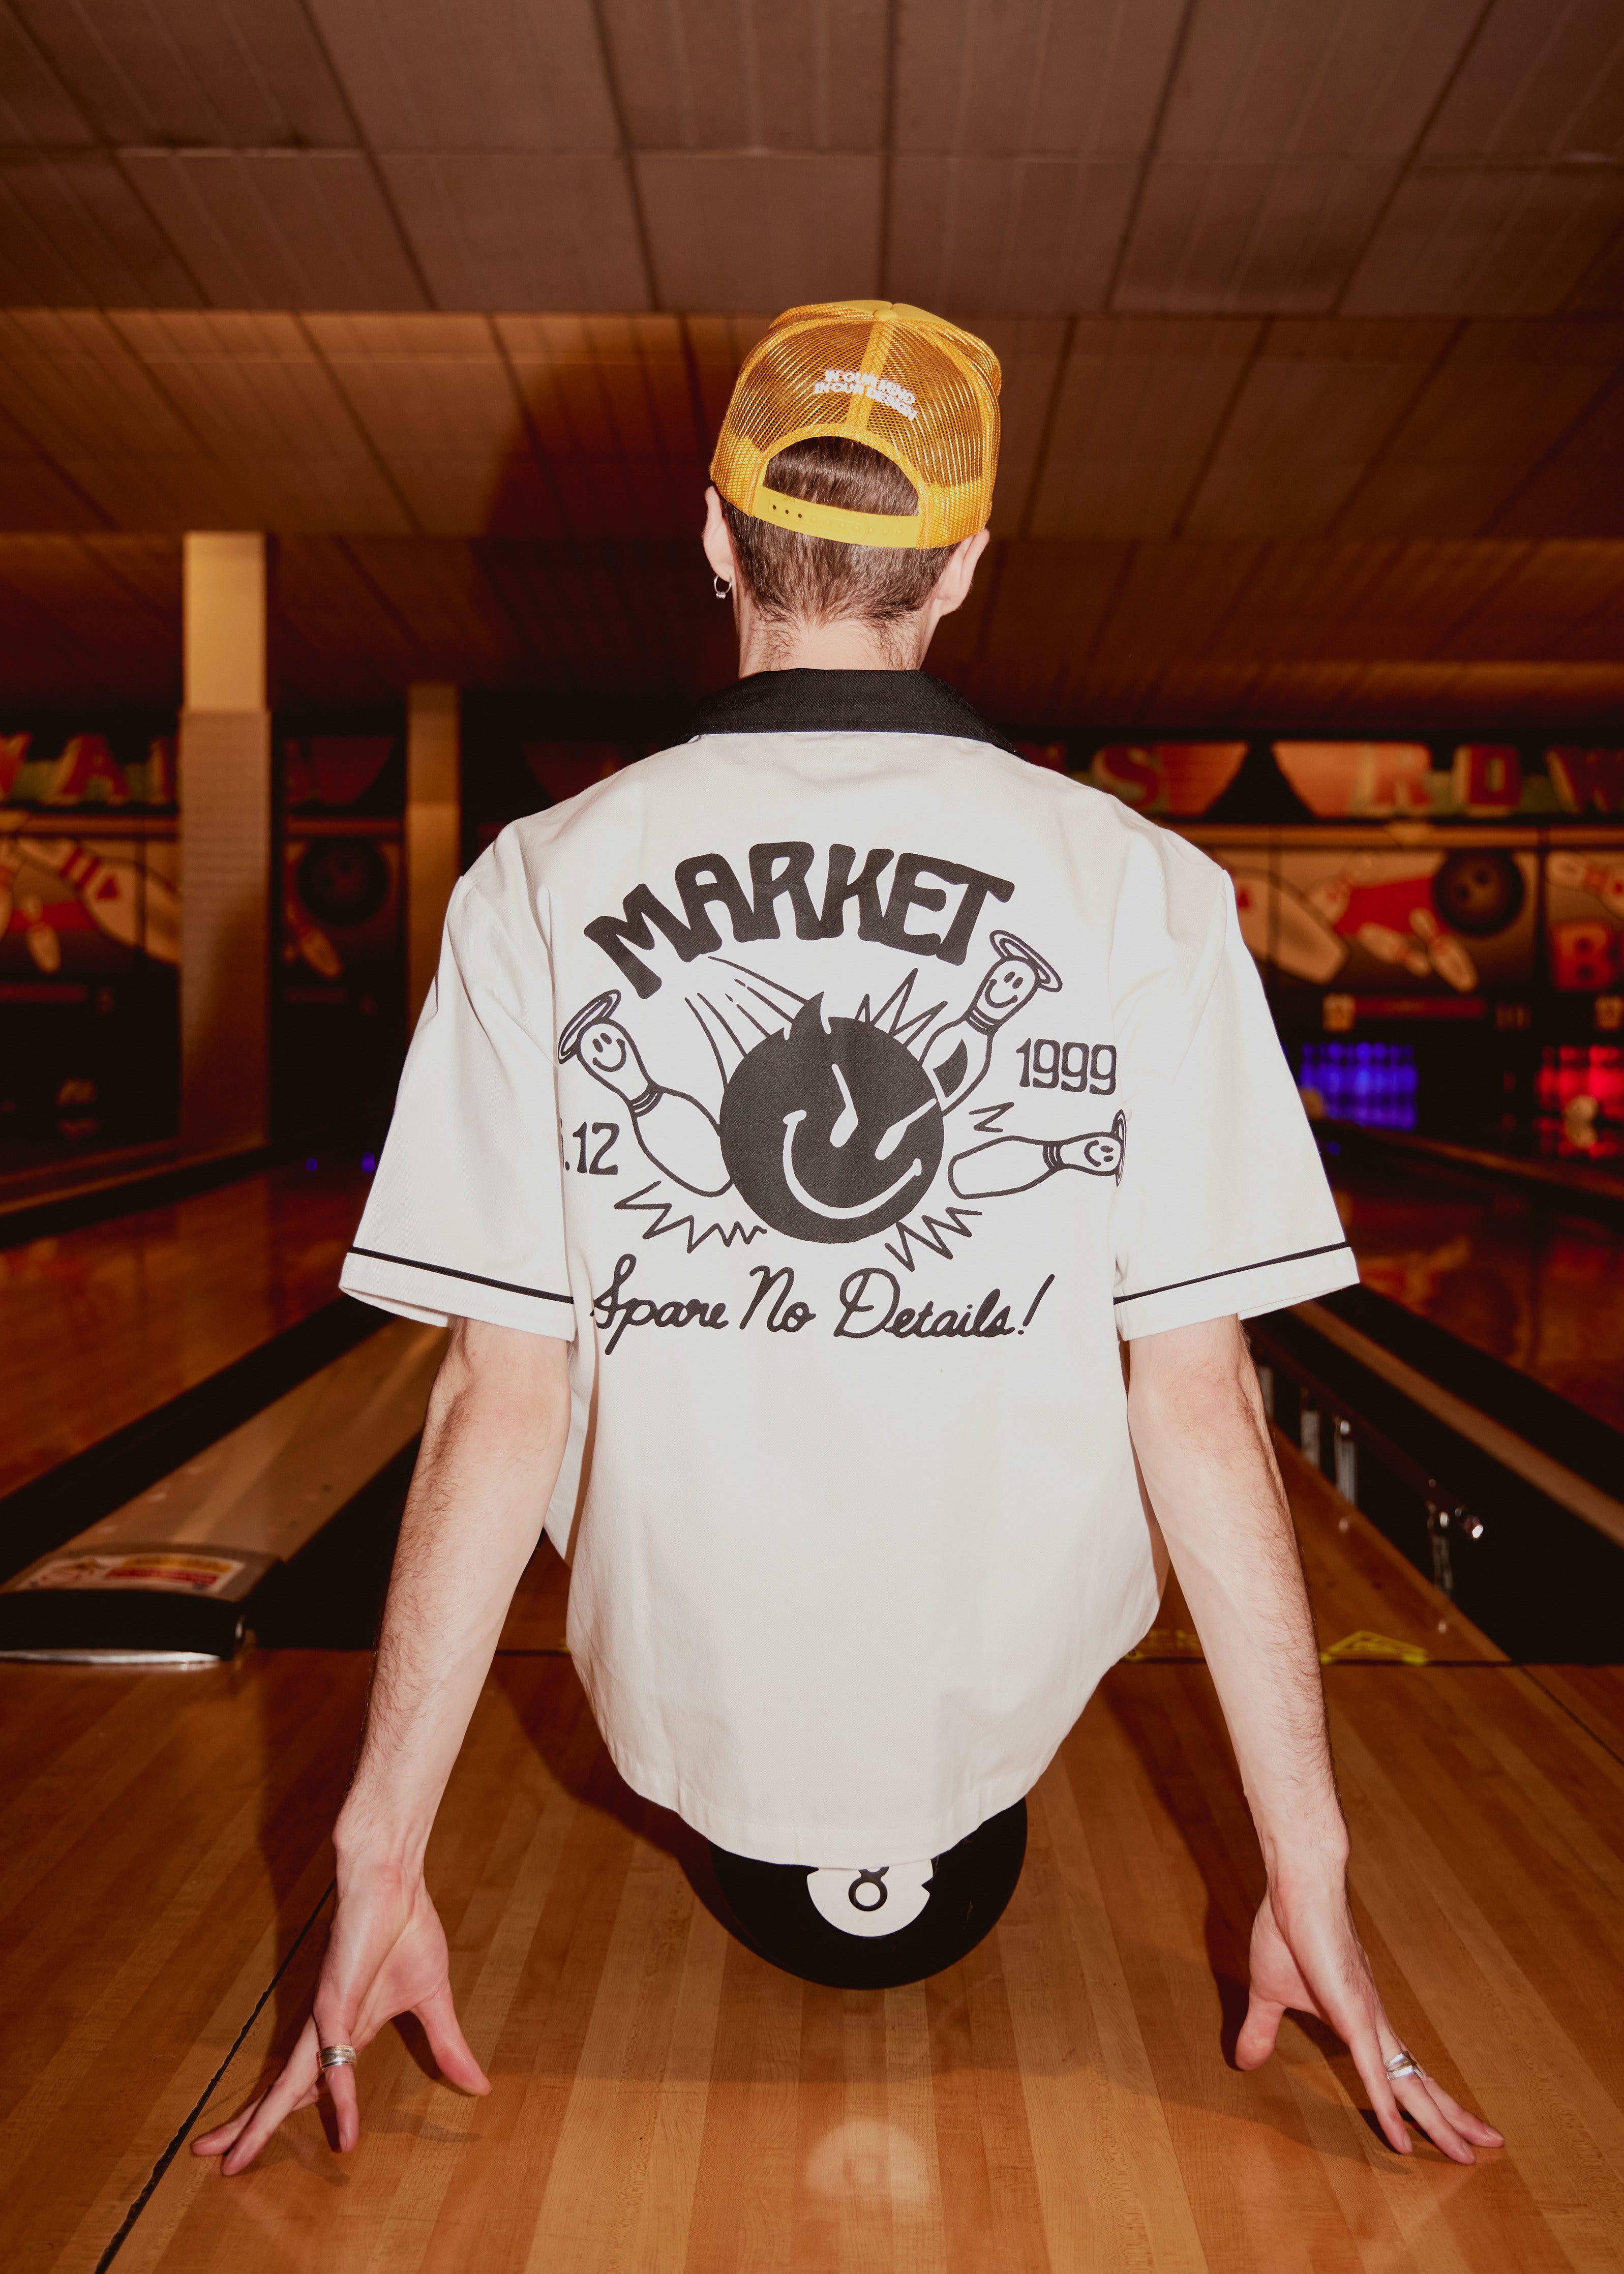 Jim from KAWALA sat on a bowling ball, wearing Market bowling shirt from the Smiley & Market collaboration.